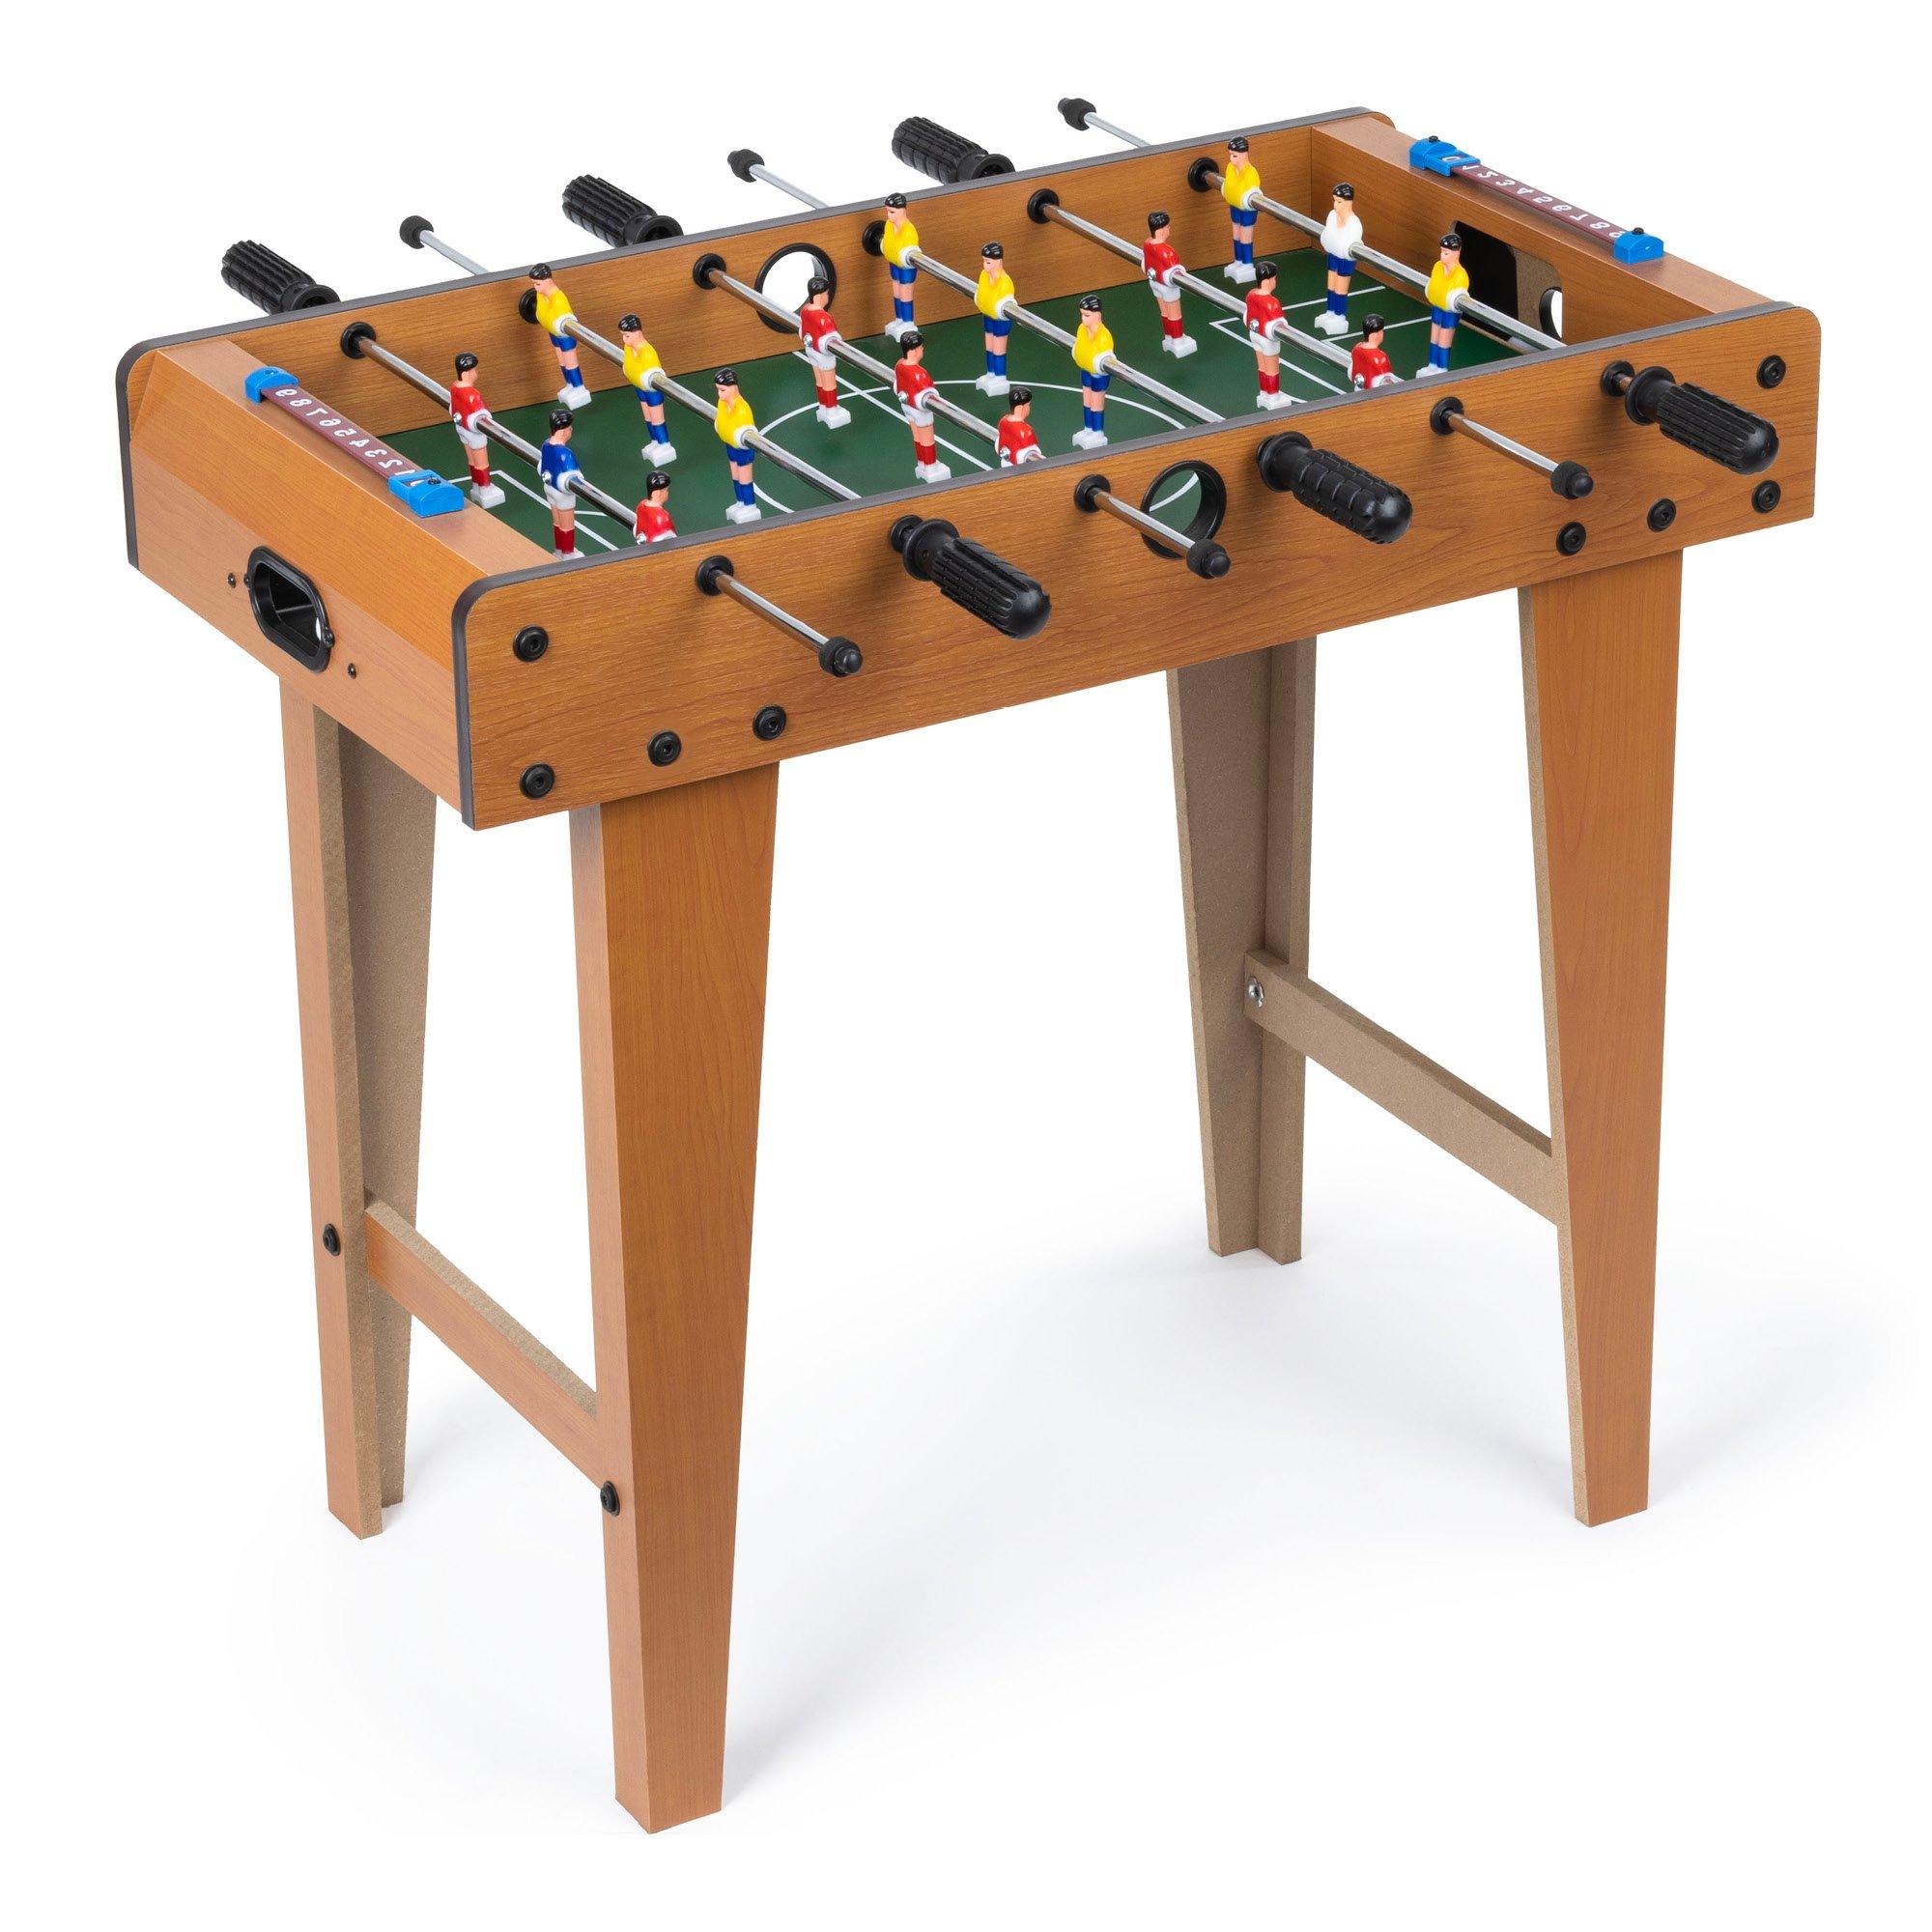 Wicked Gizmos Deluxe Free Standing Football Soccer Table Family Game Wooden W Legs Xmas Gift